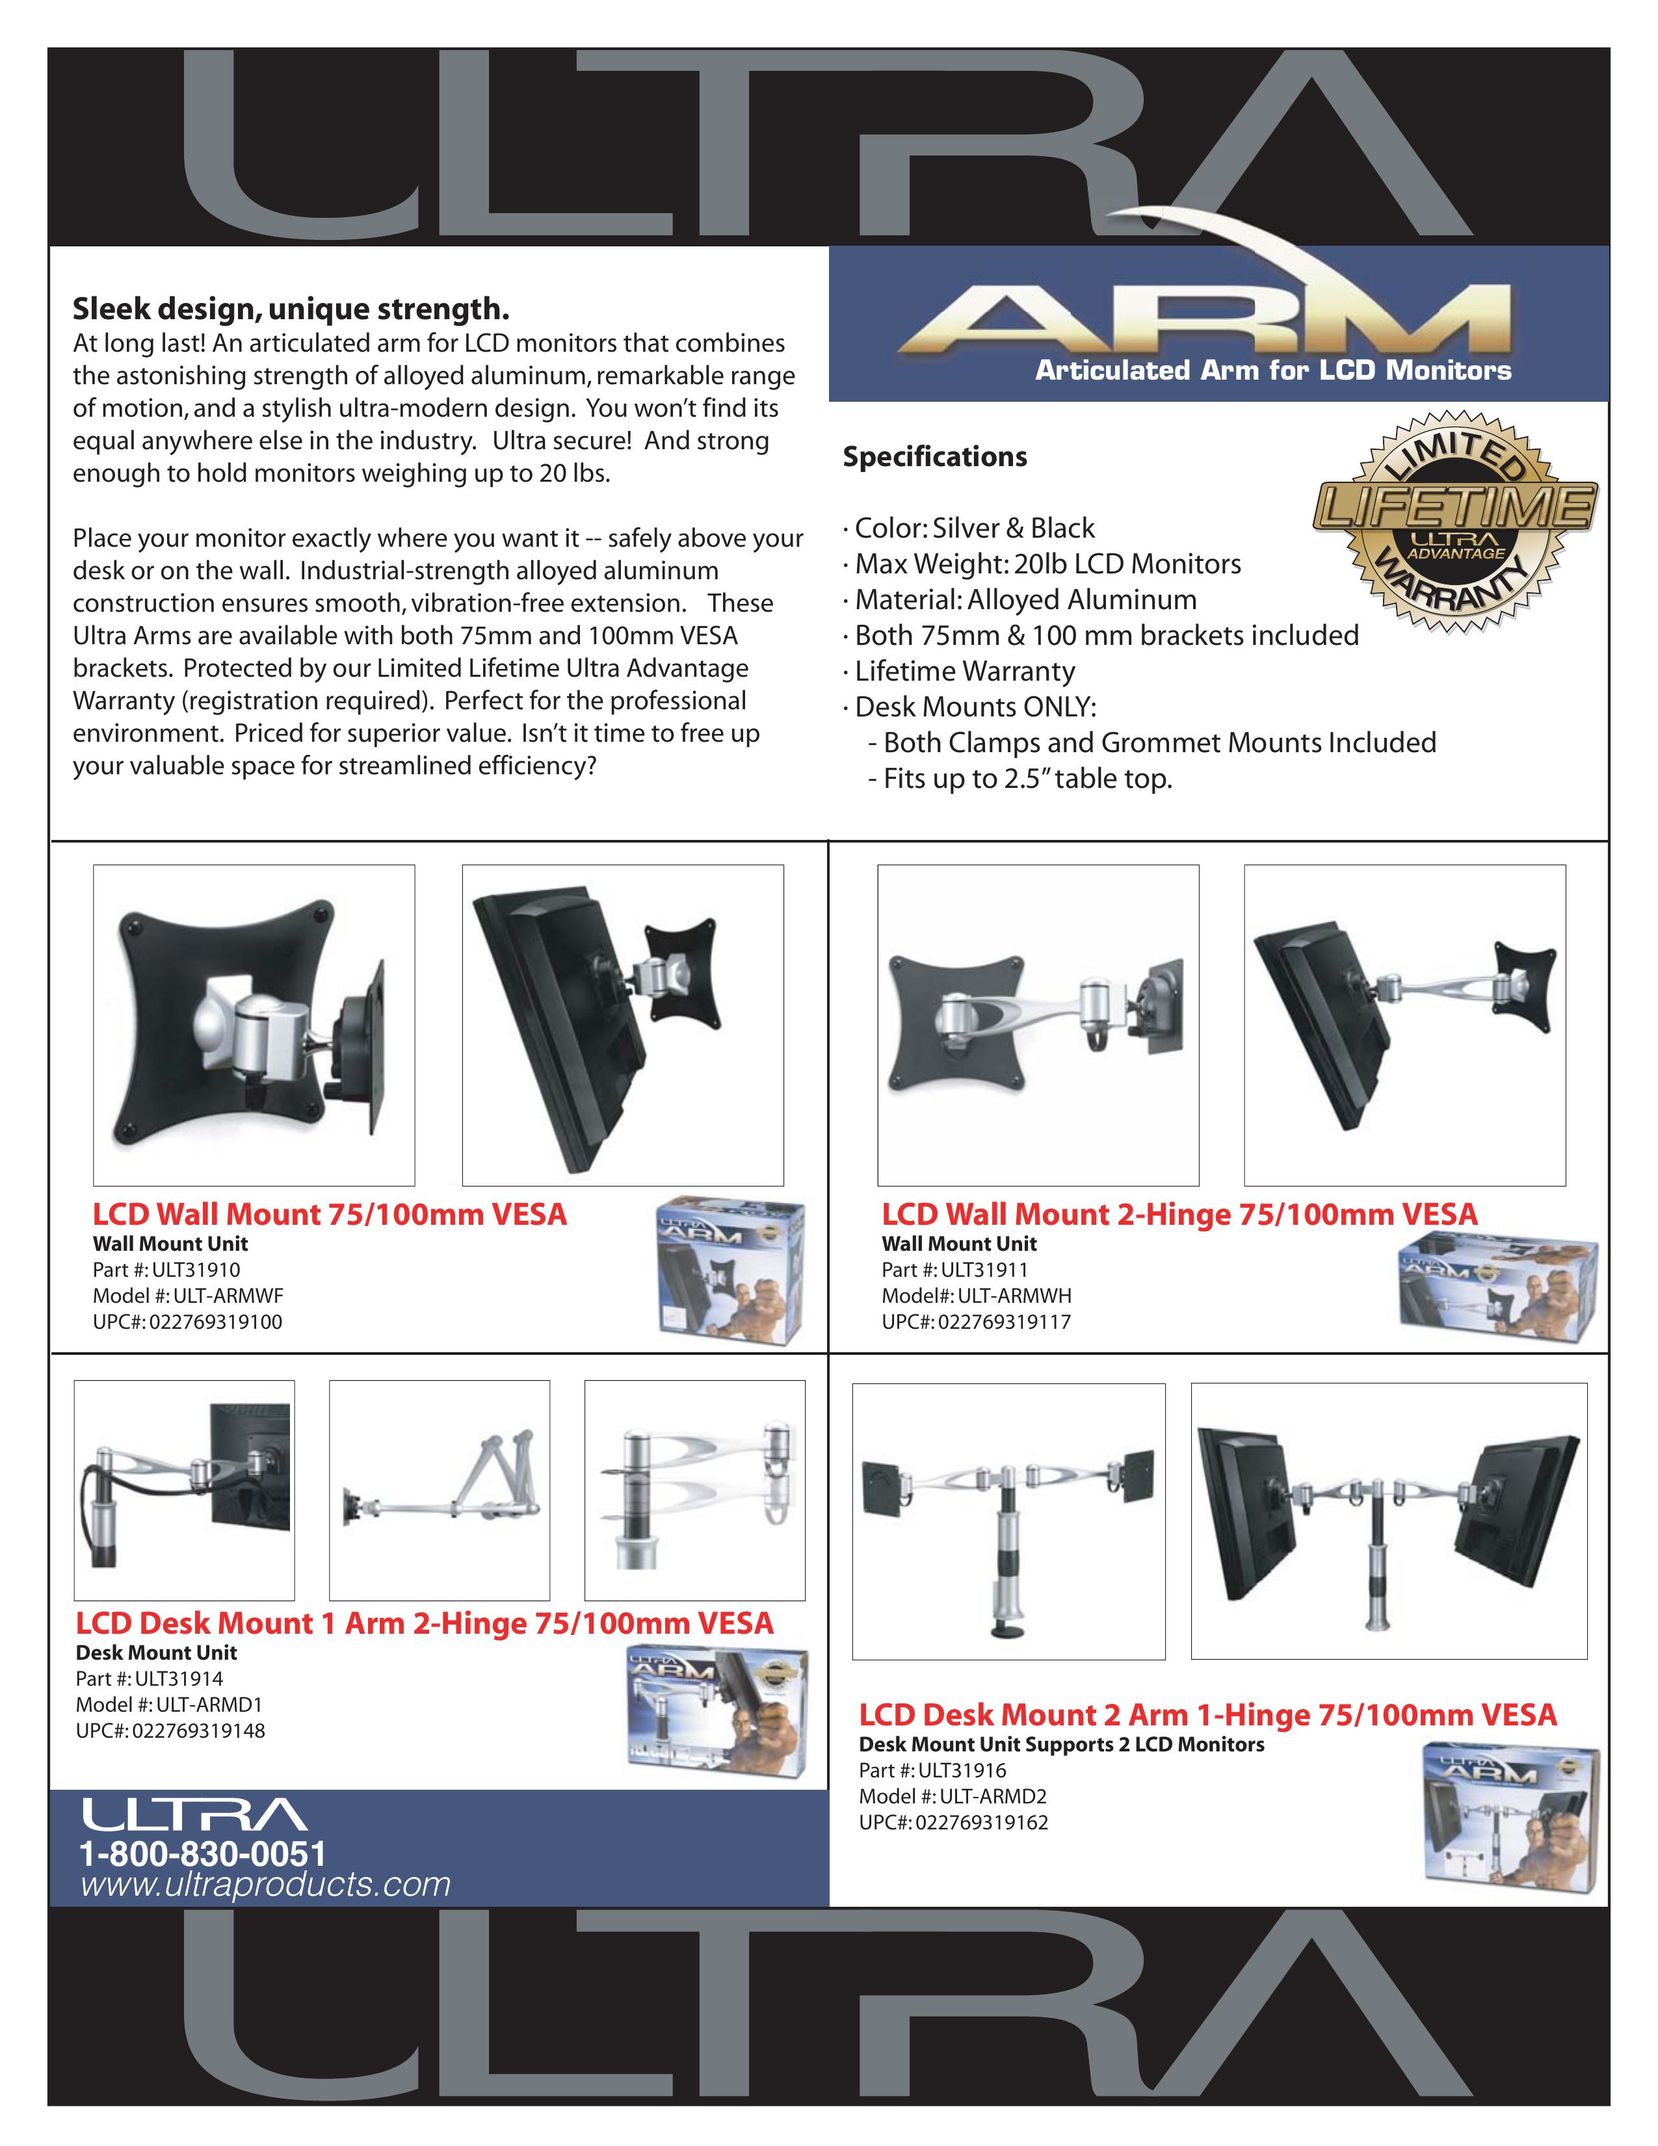 Ultra Products ULT-ARMWH Indoor Furnishings User Manual